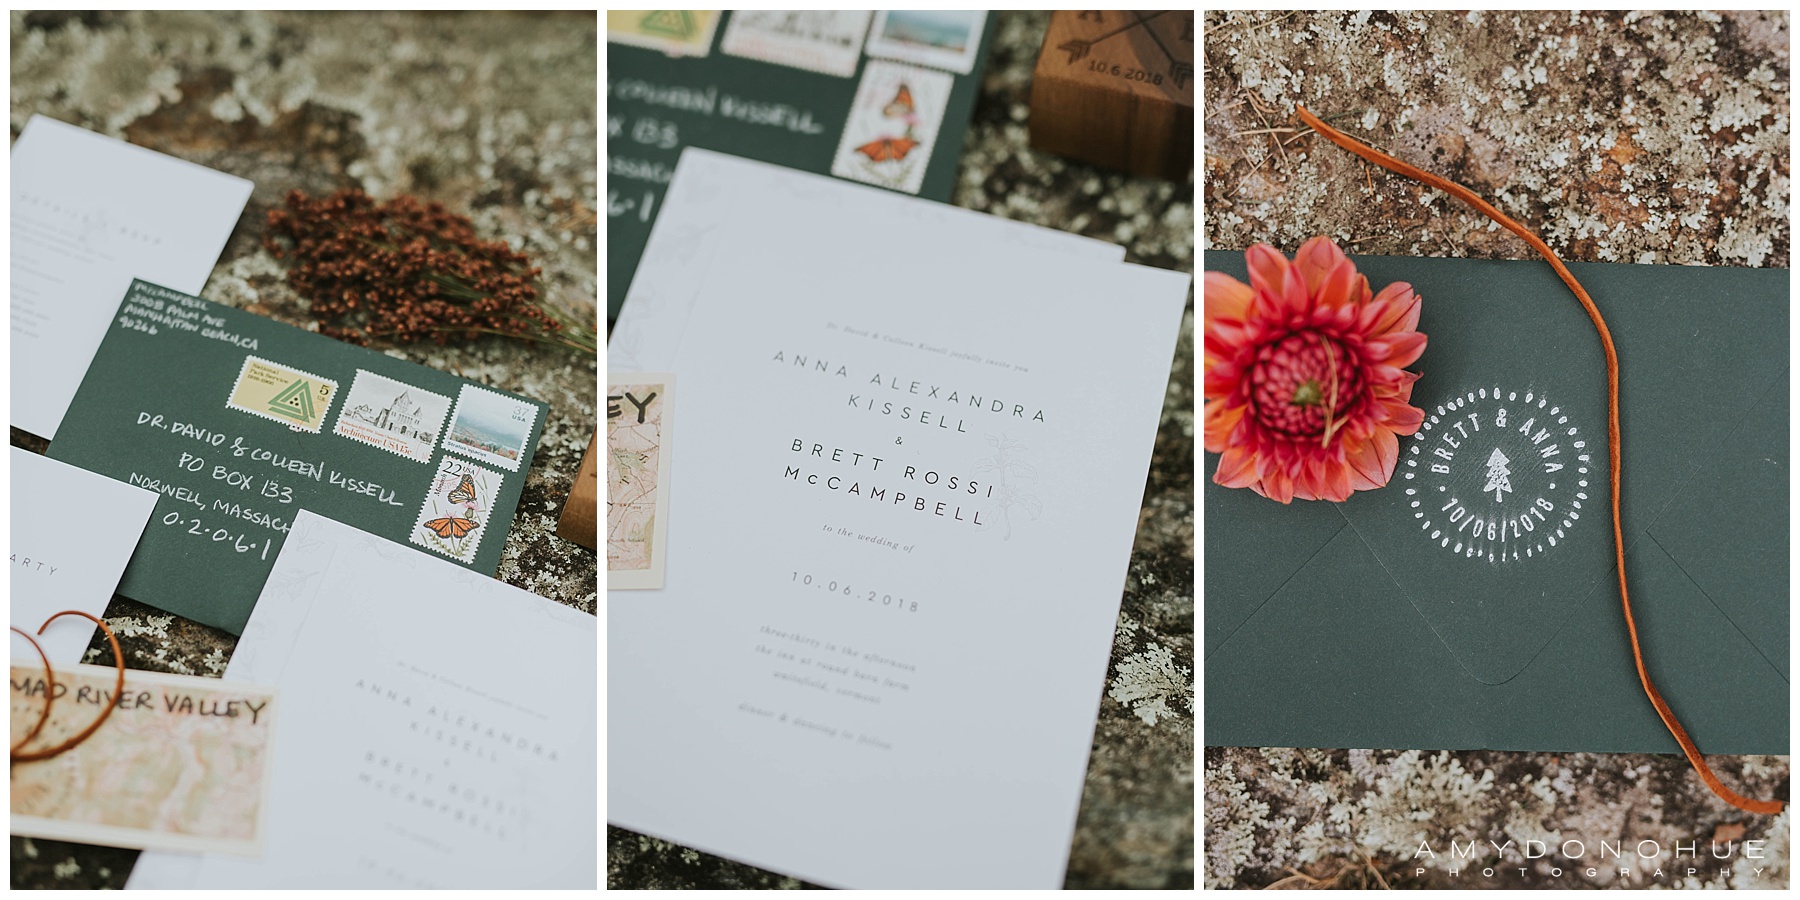 Wedding Stationery by Paper Culture | The Inn at Round Barn Farm | © Amy Donohue Photography